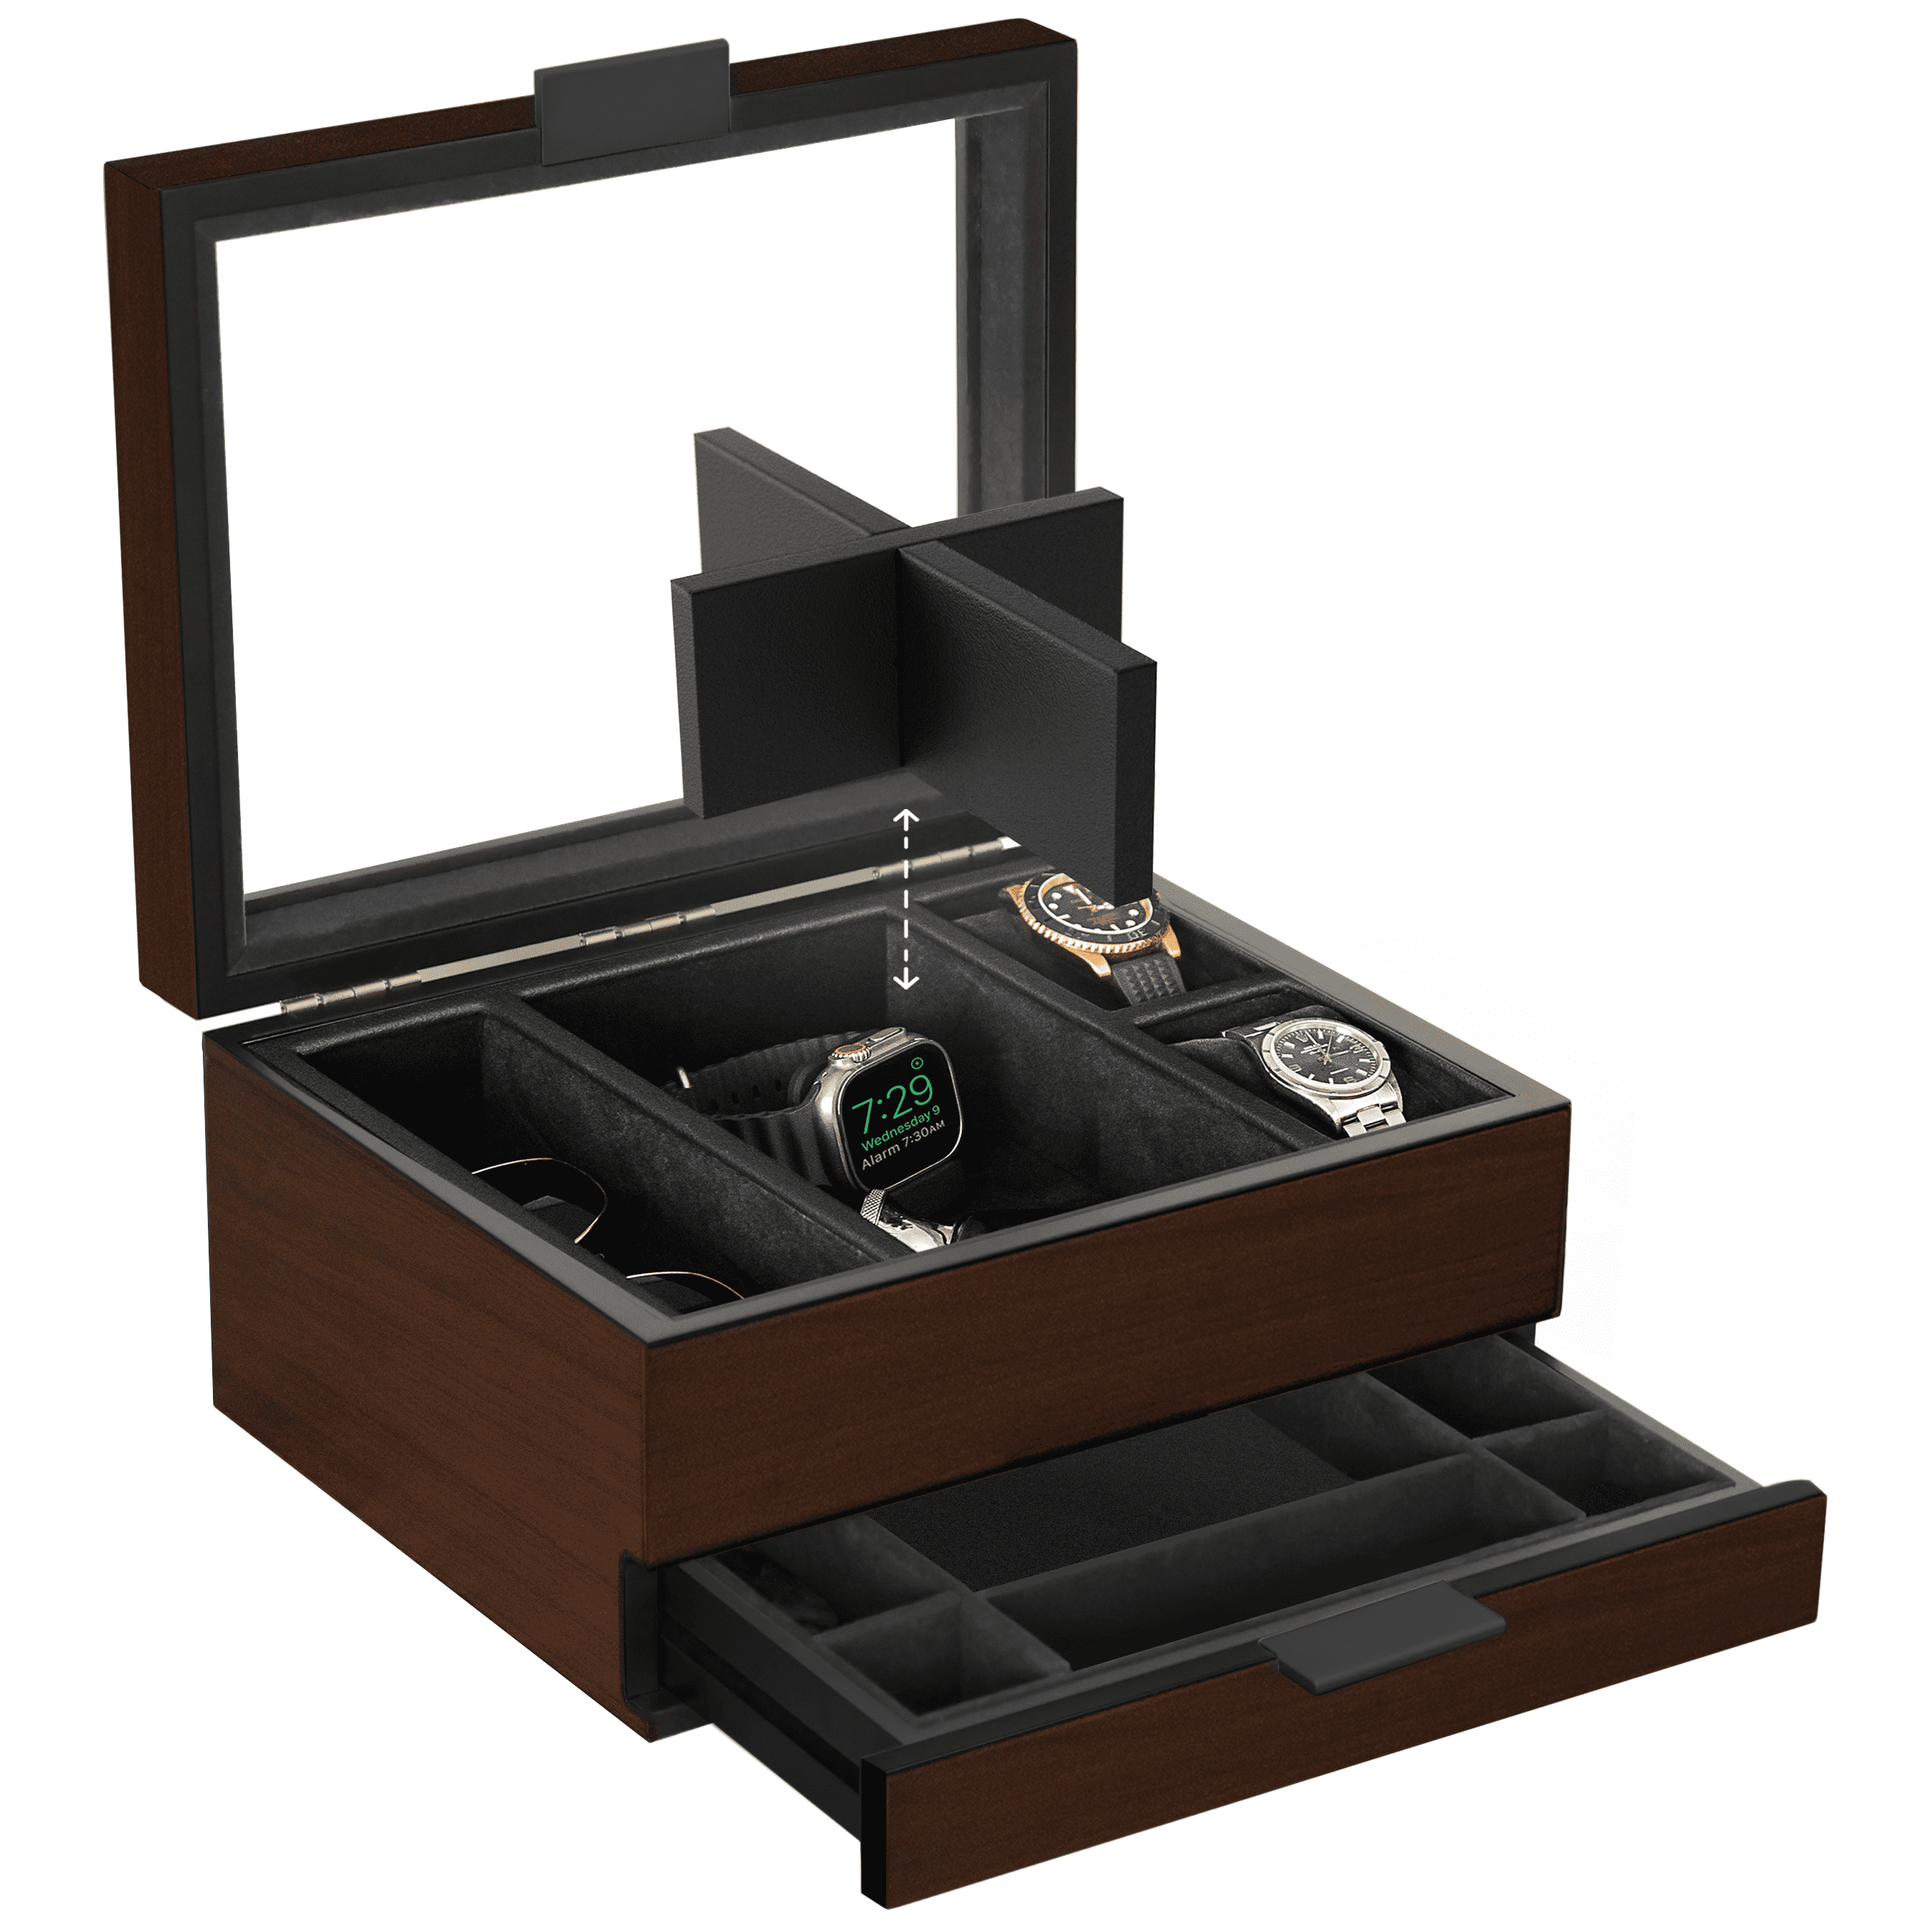 Buy FeibrandFeibrand Watch Box, Watch Box for Men, 12 Slots Stylish Watch  Case with Watch Display and Storage, Watch Organizer and Collection Box  with Watch Holder Men's Watch Storage Case Gift Online